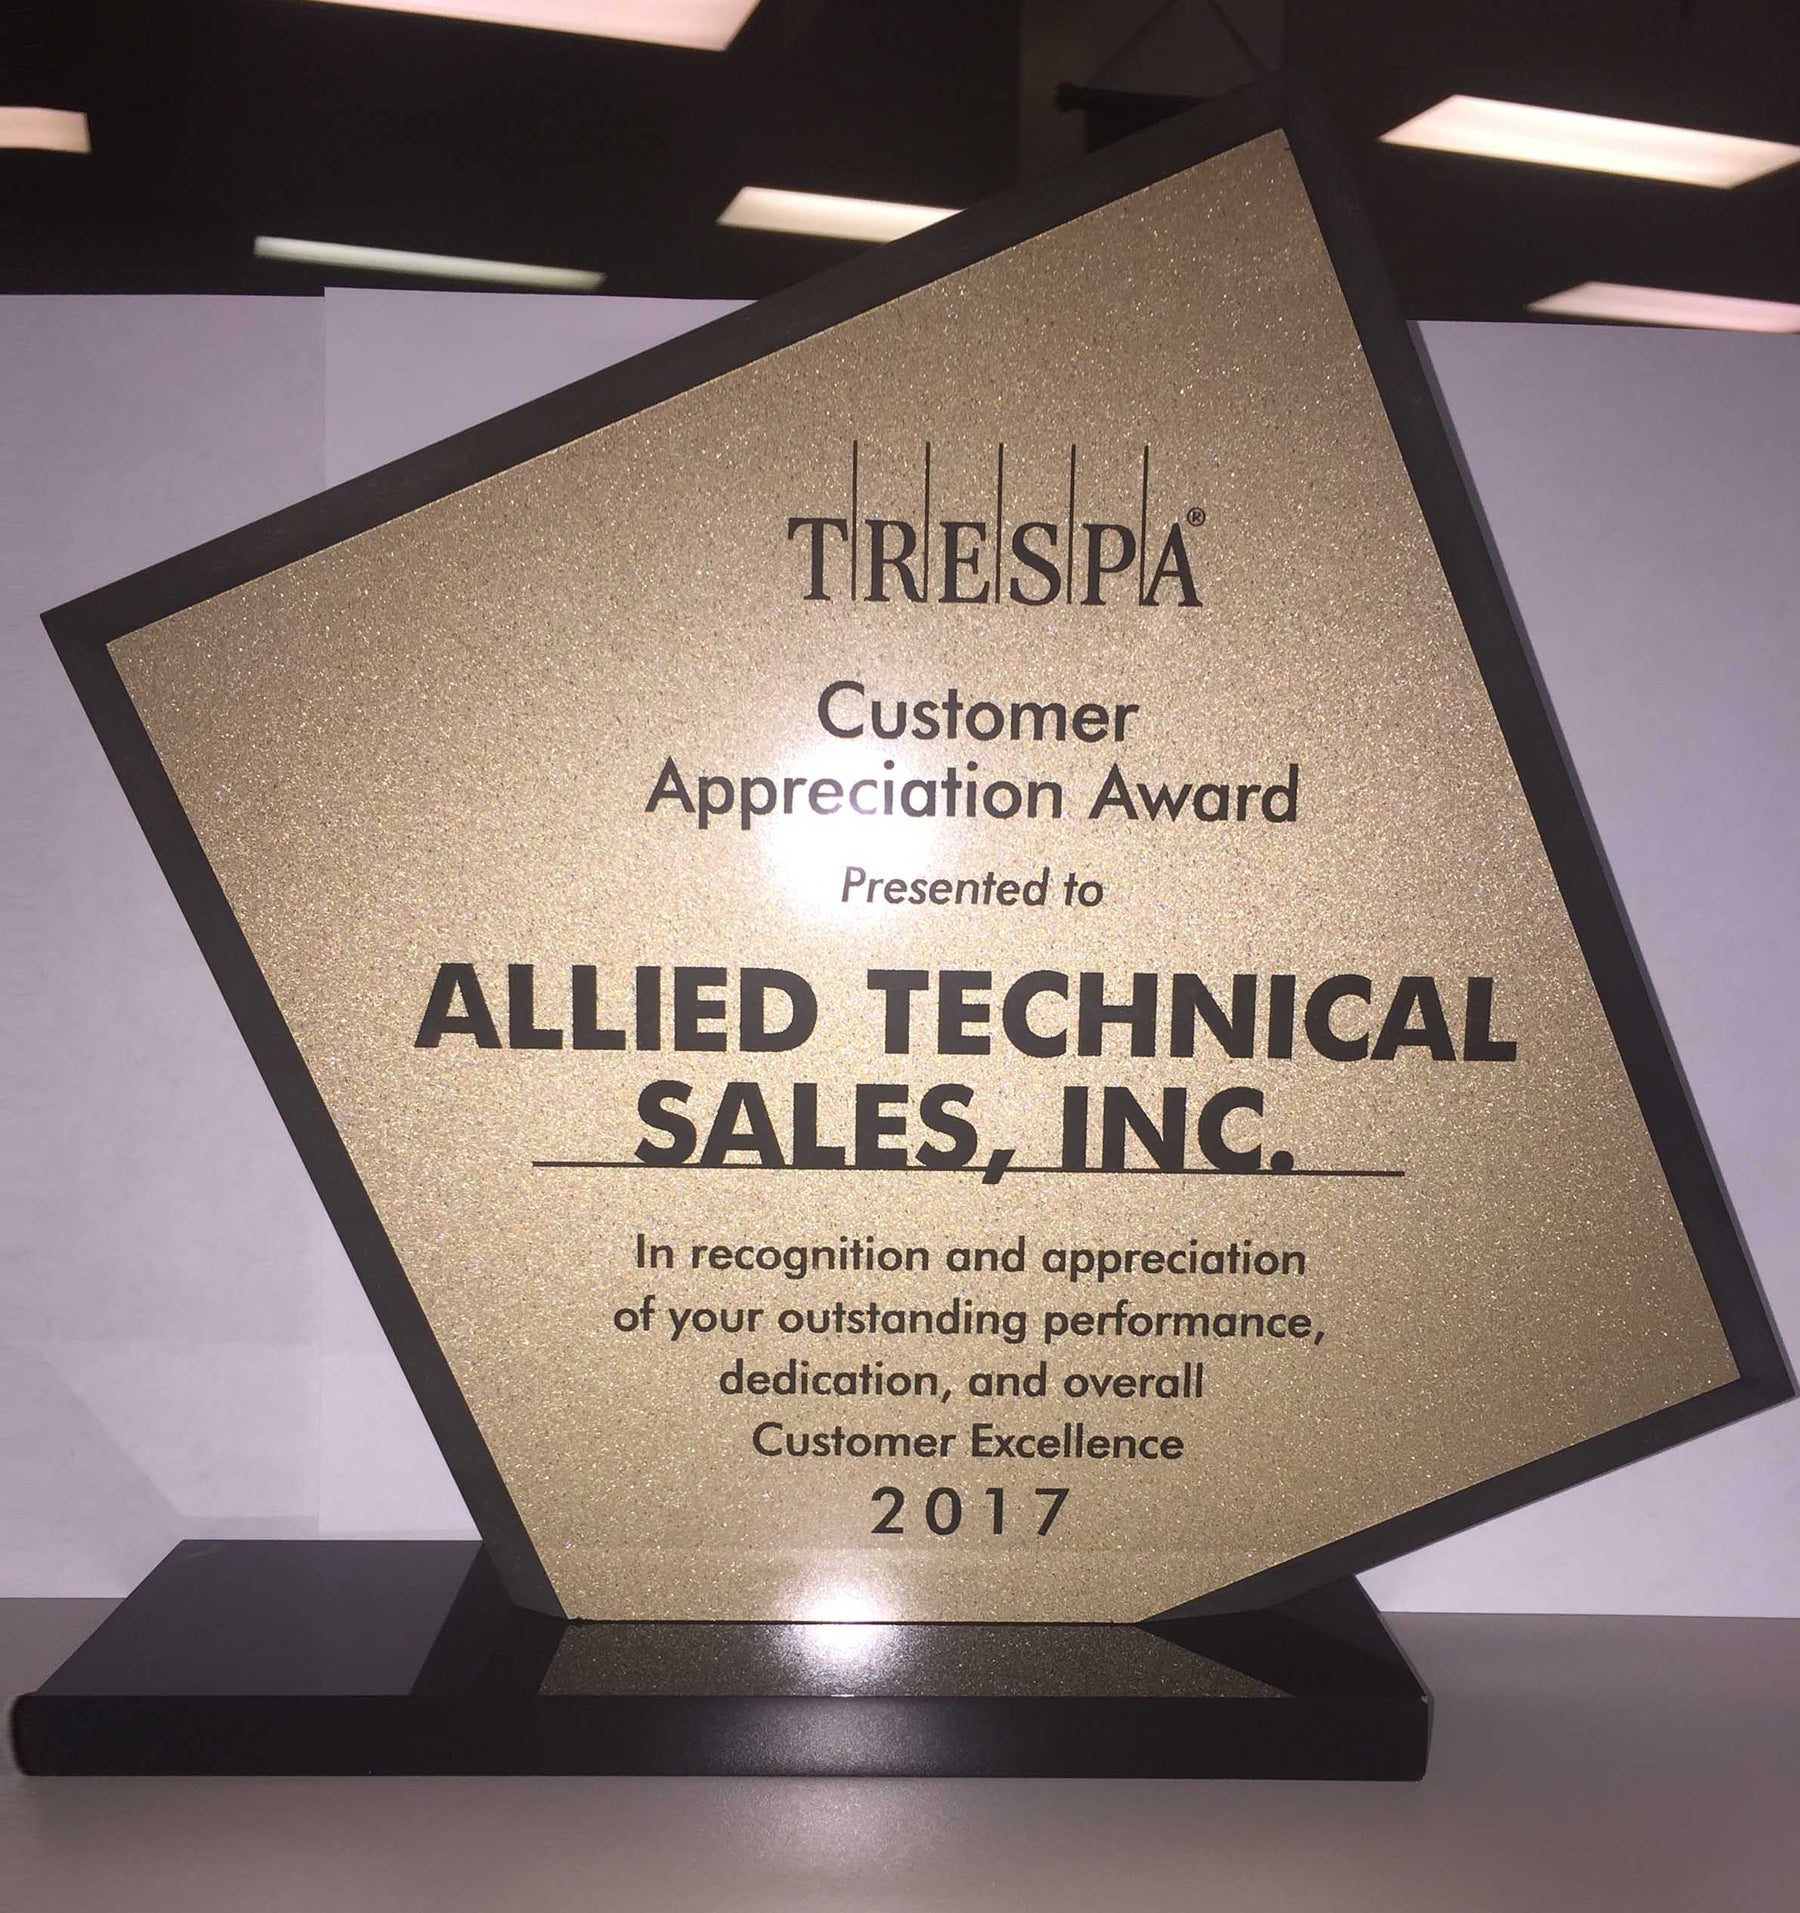 Allied Technical Sales receives Customer Excellence Award  